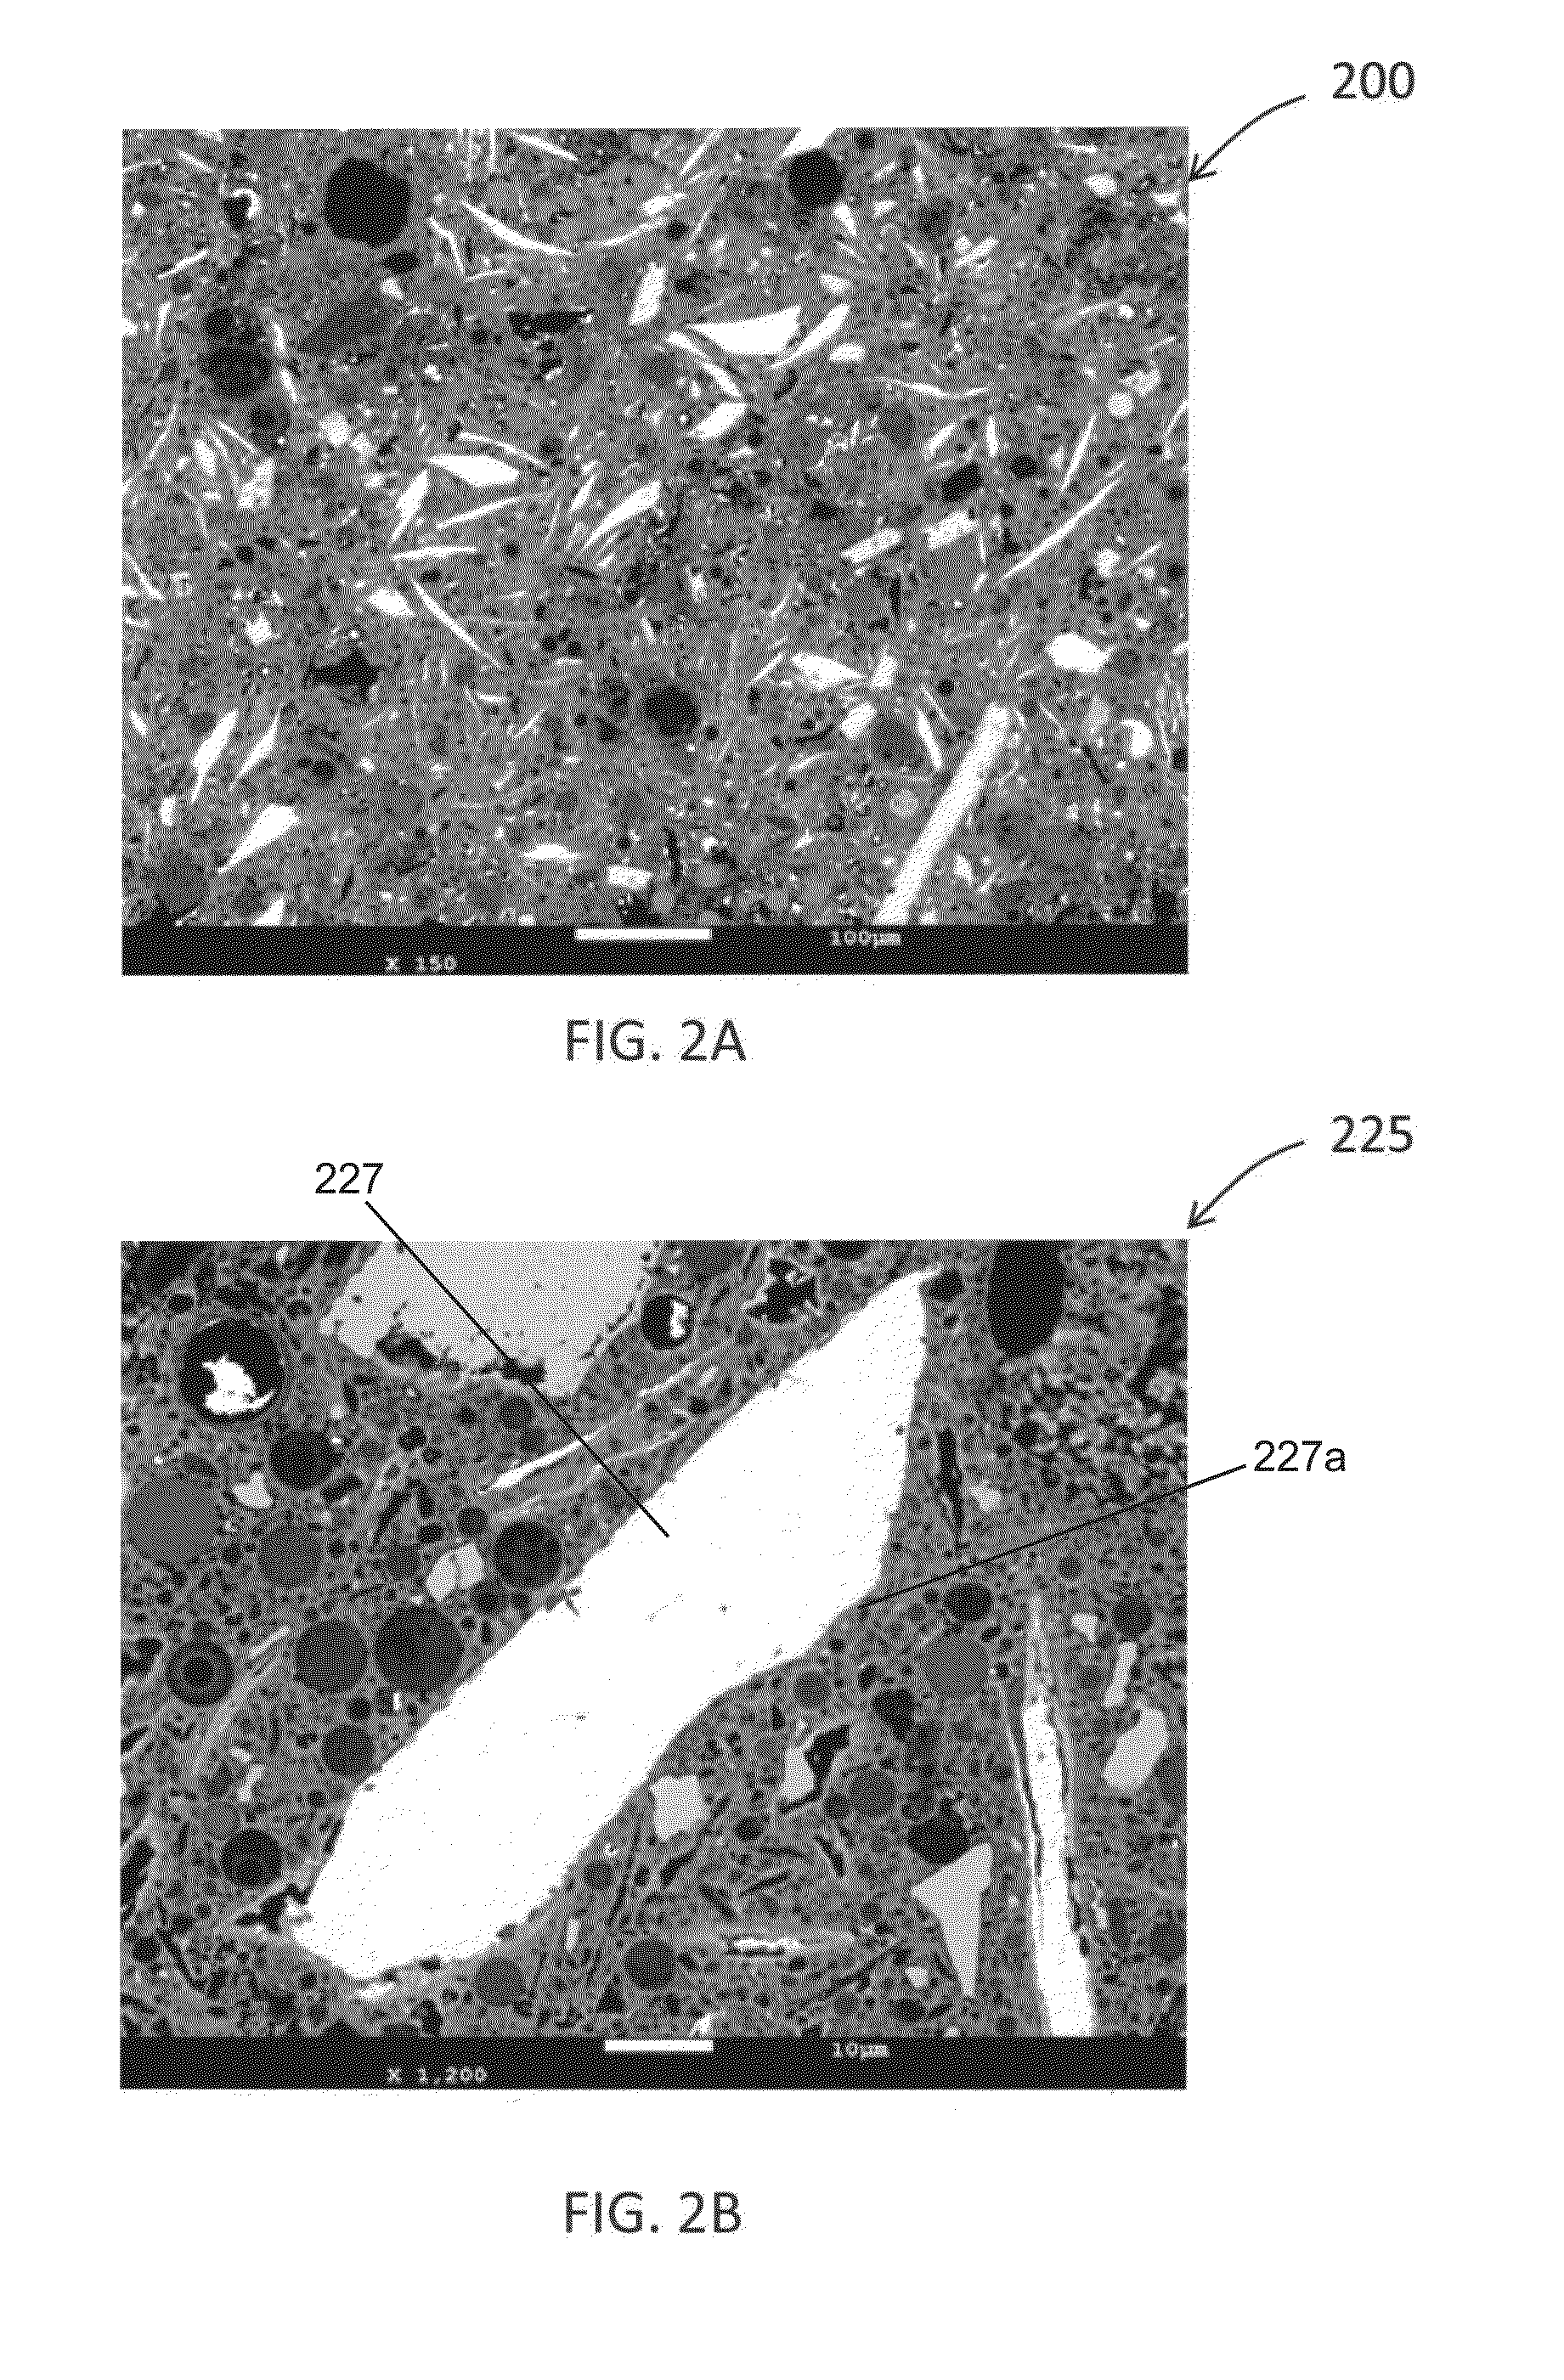 Binder compositions and method of synthesis